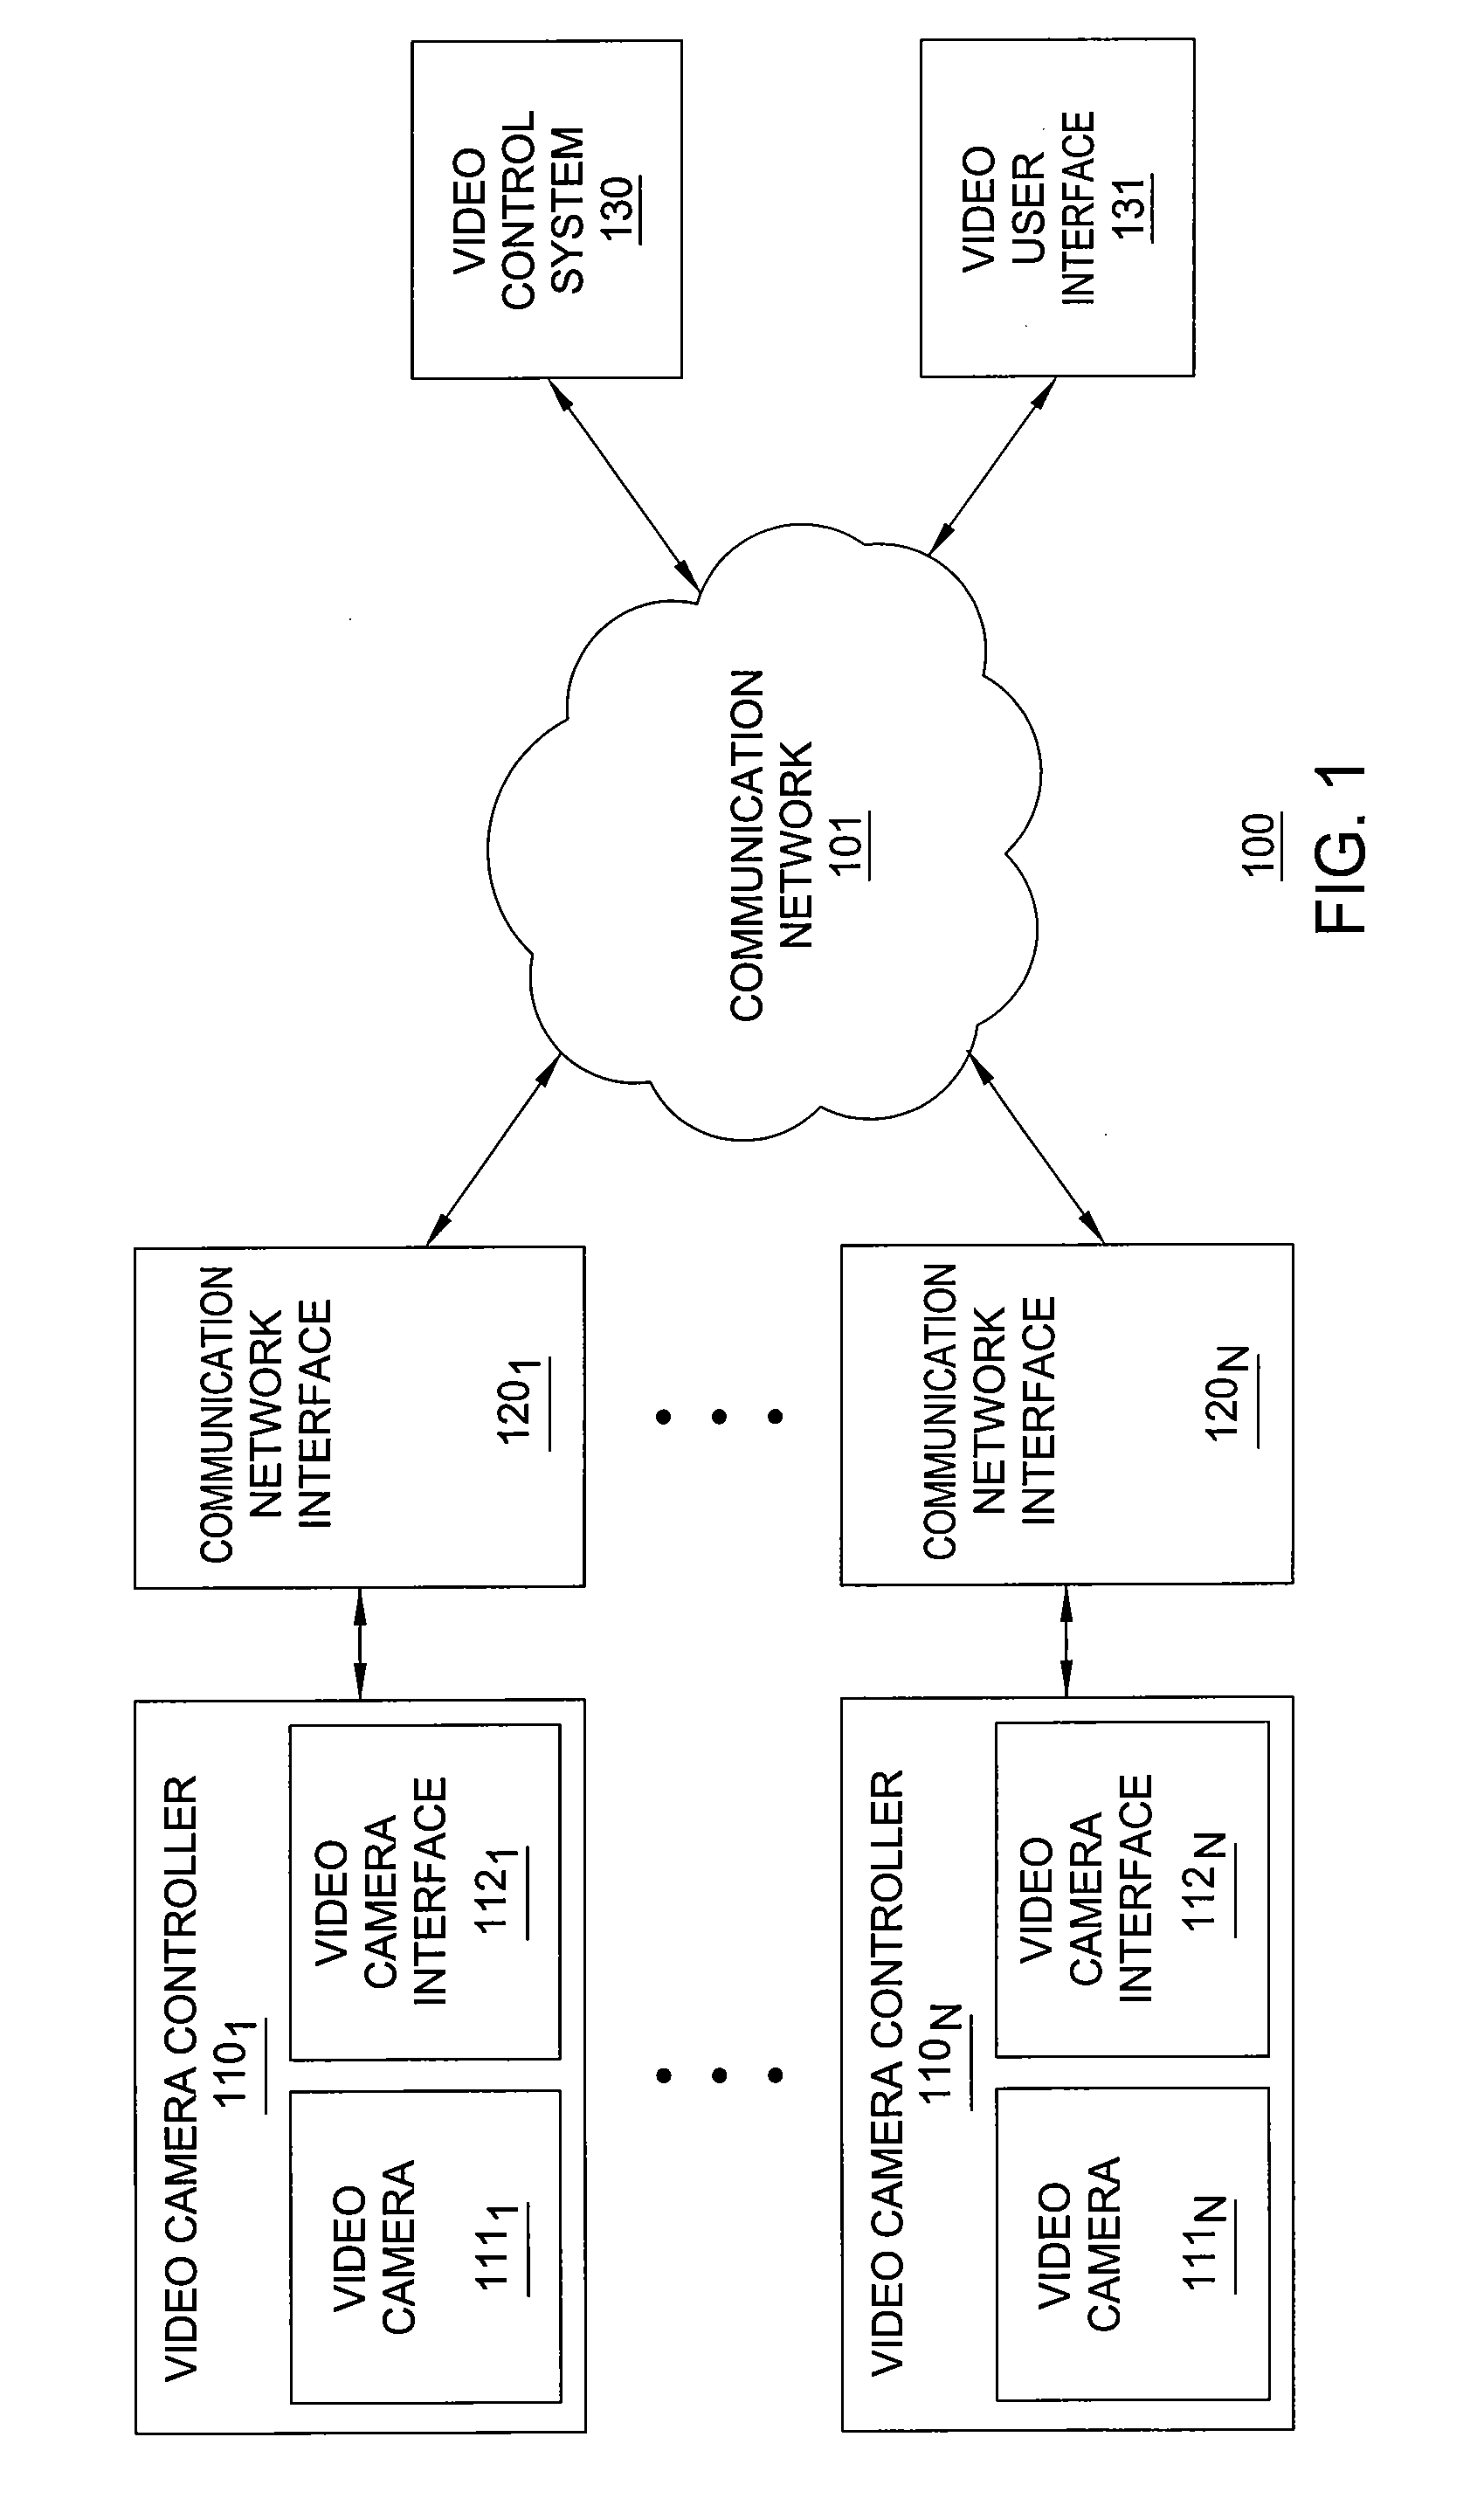 Method and apparatus for controlling video streams